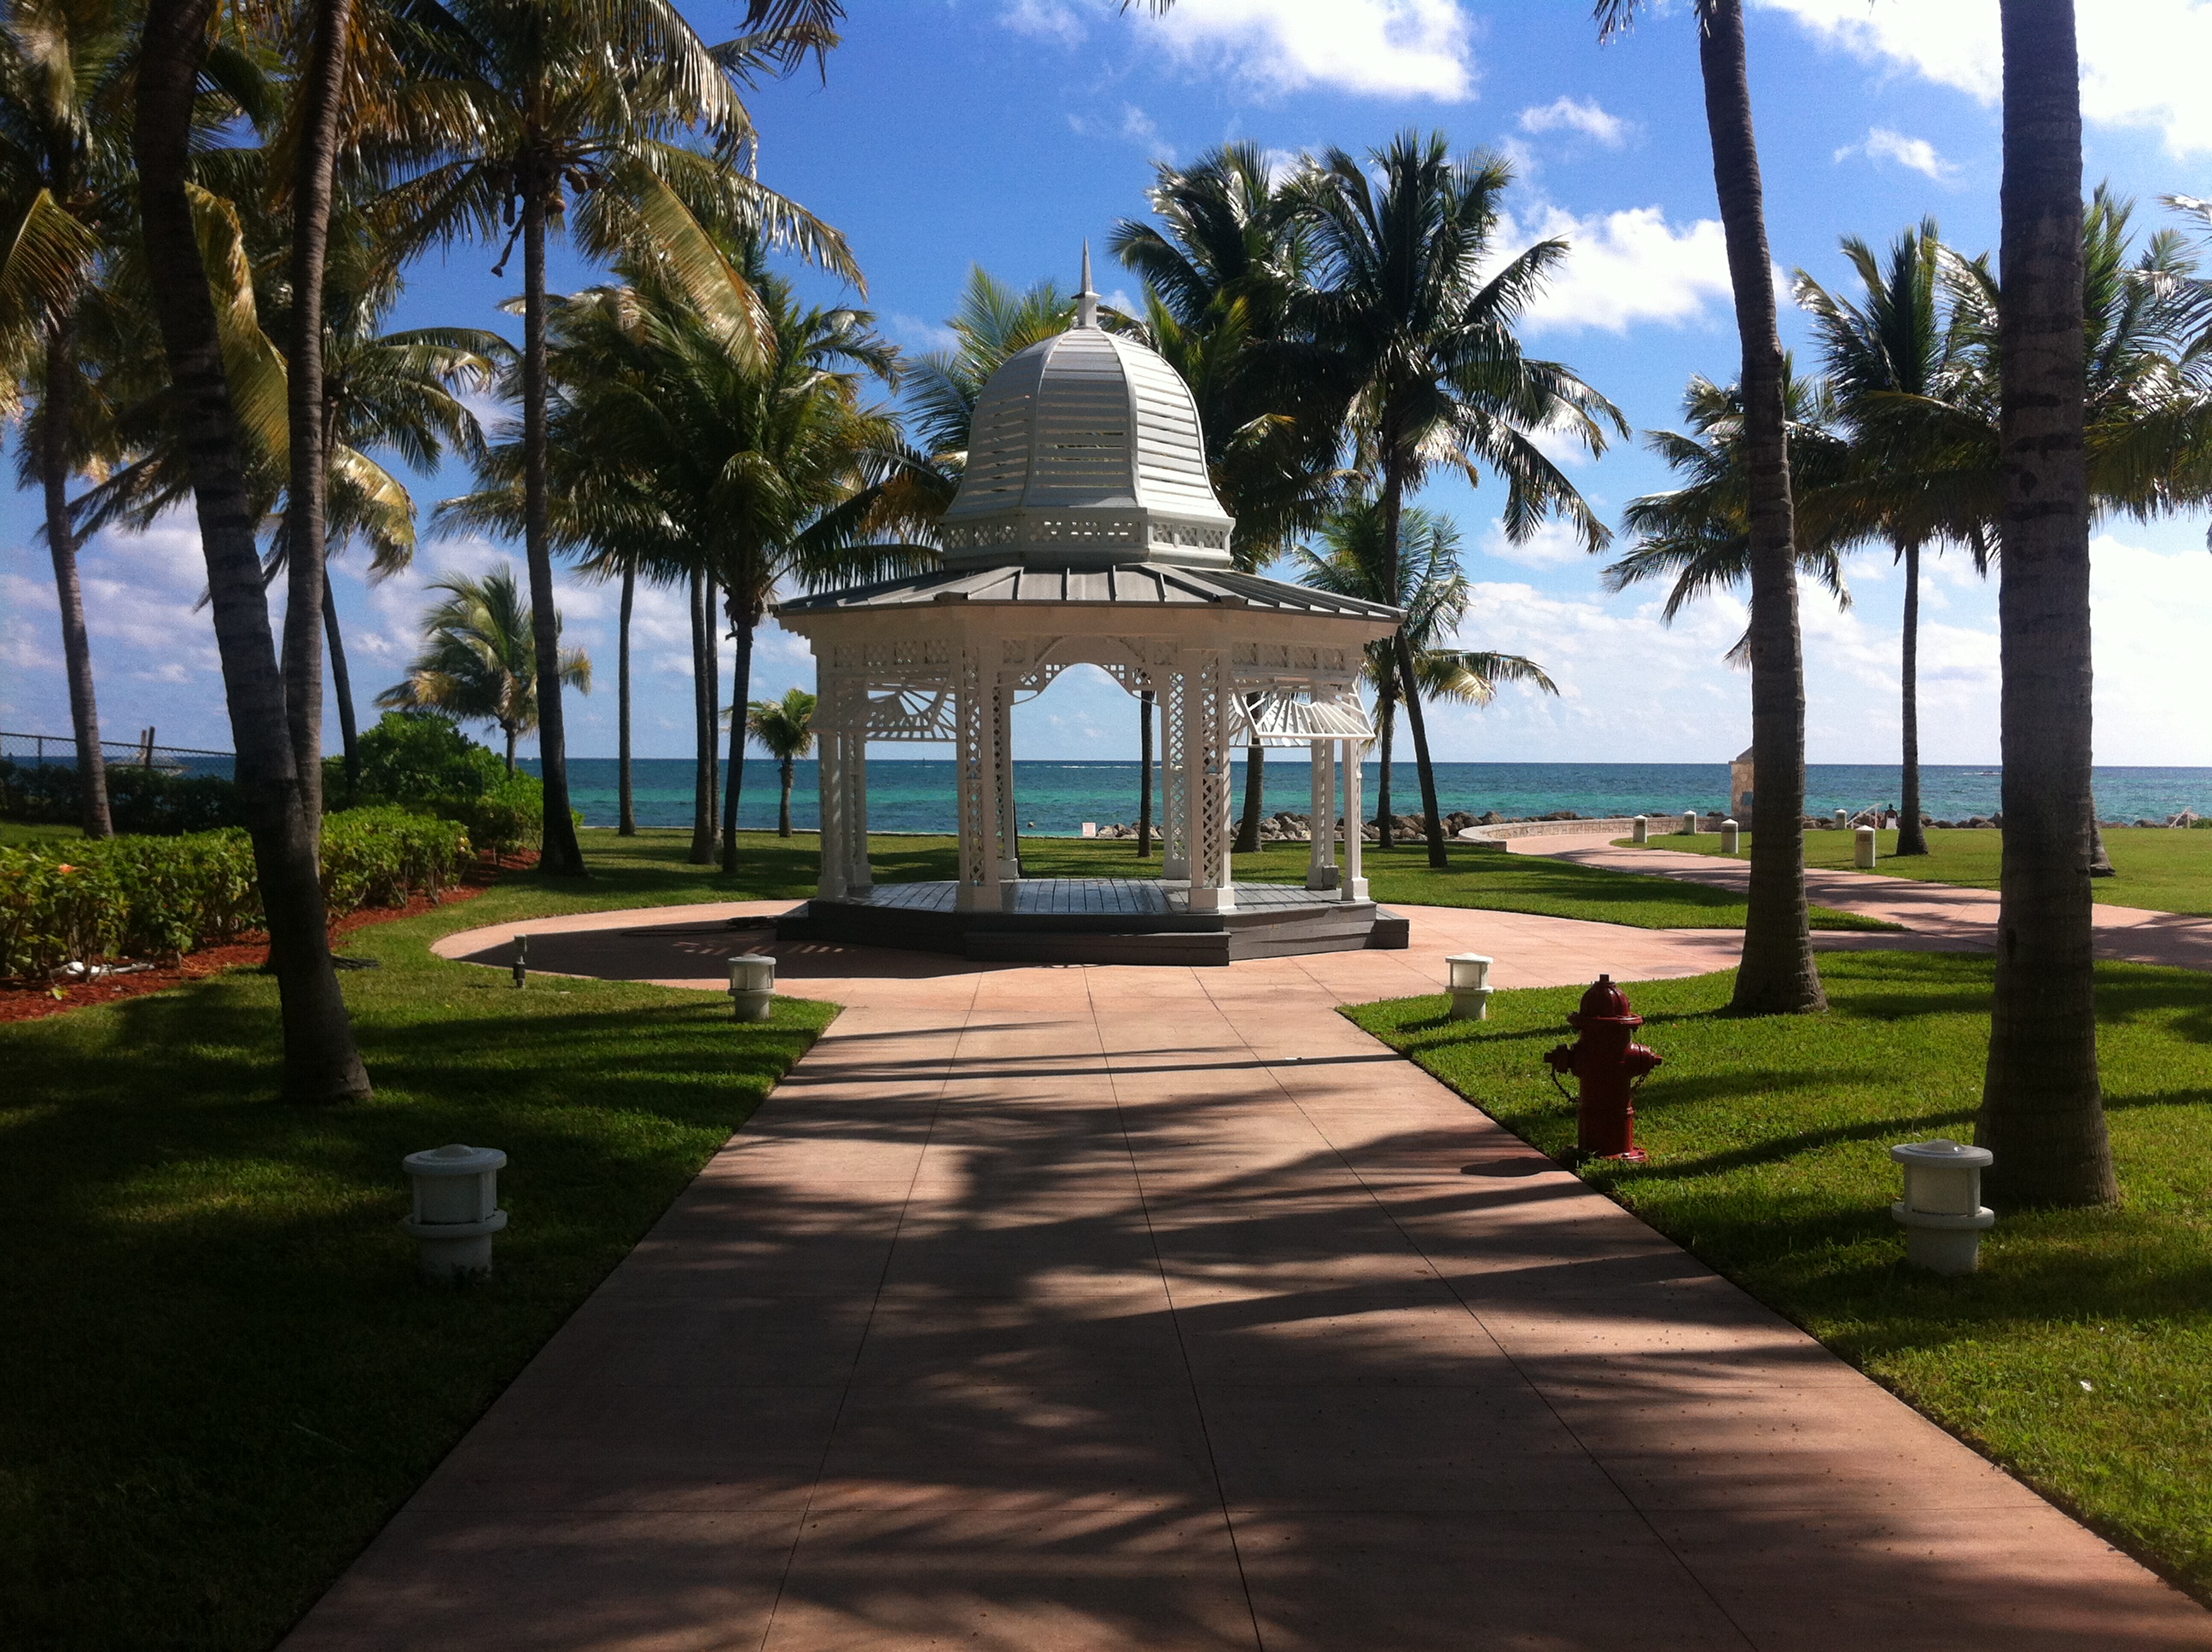 Where to Stay in Grand Bahama | Grand Lucayan Resort | Bahama Resorts & Hotels | Gazebo at Grand Lucayan resort